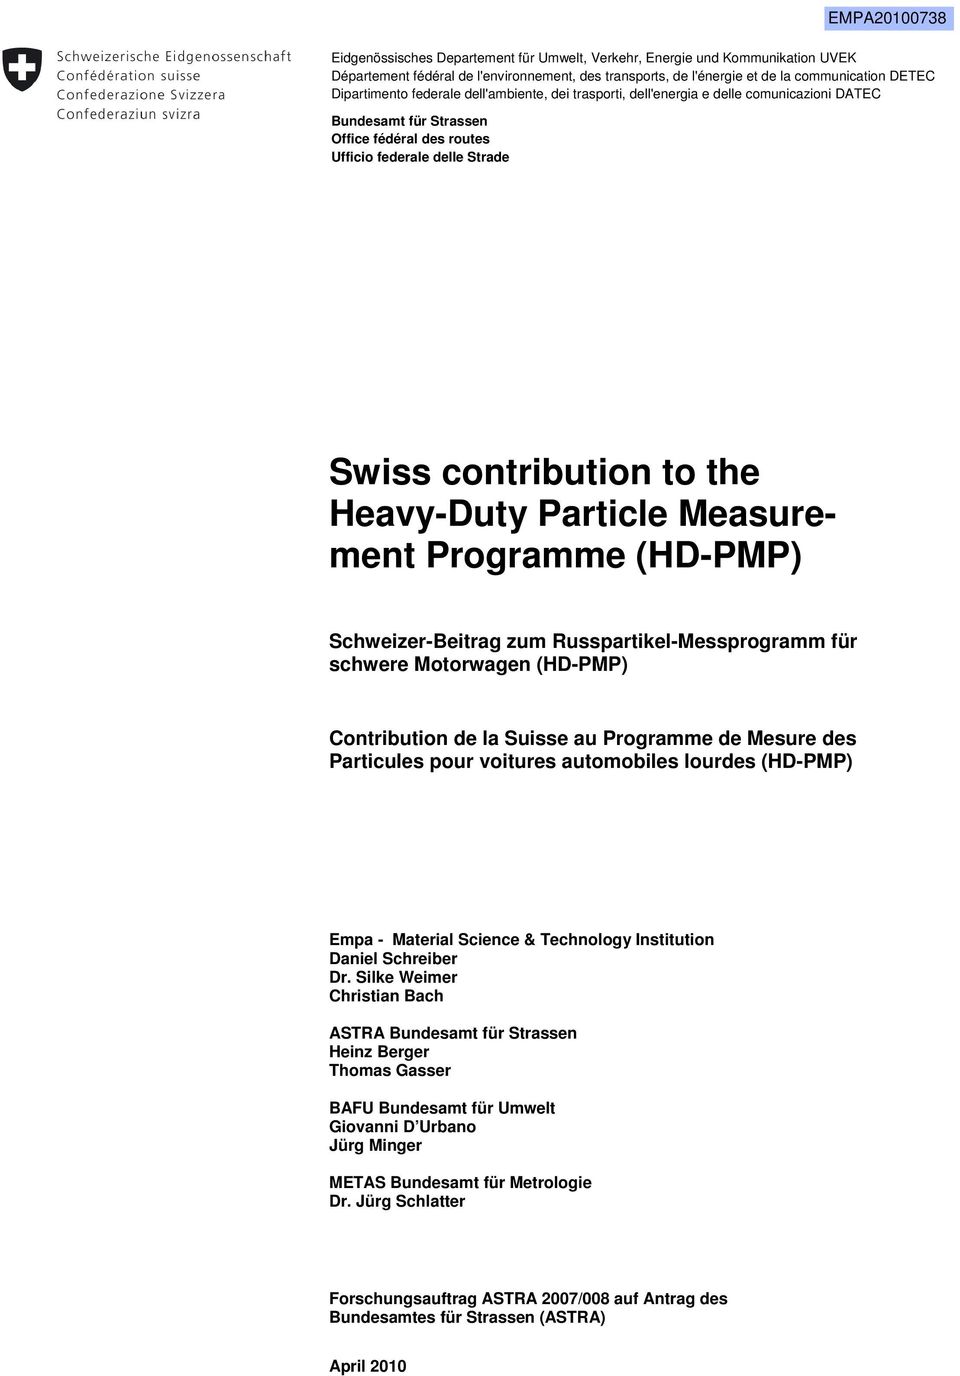 Swiss Contribution To The Heavy Duty Particle Measurement